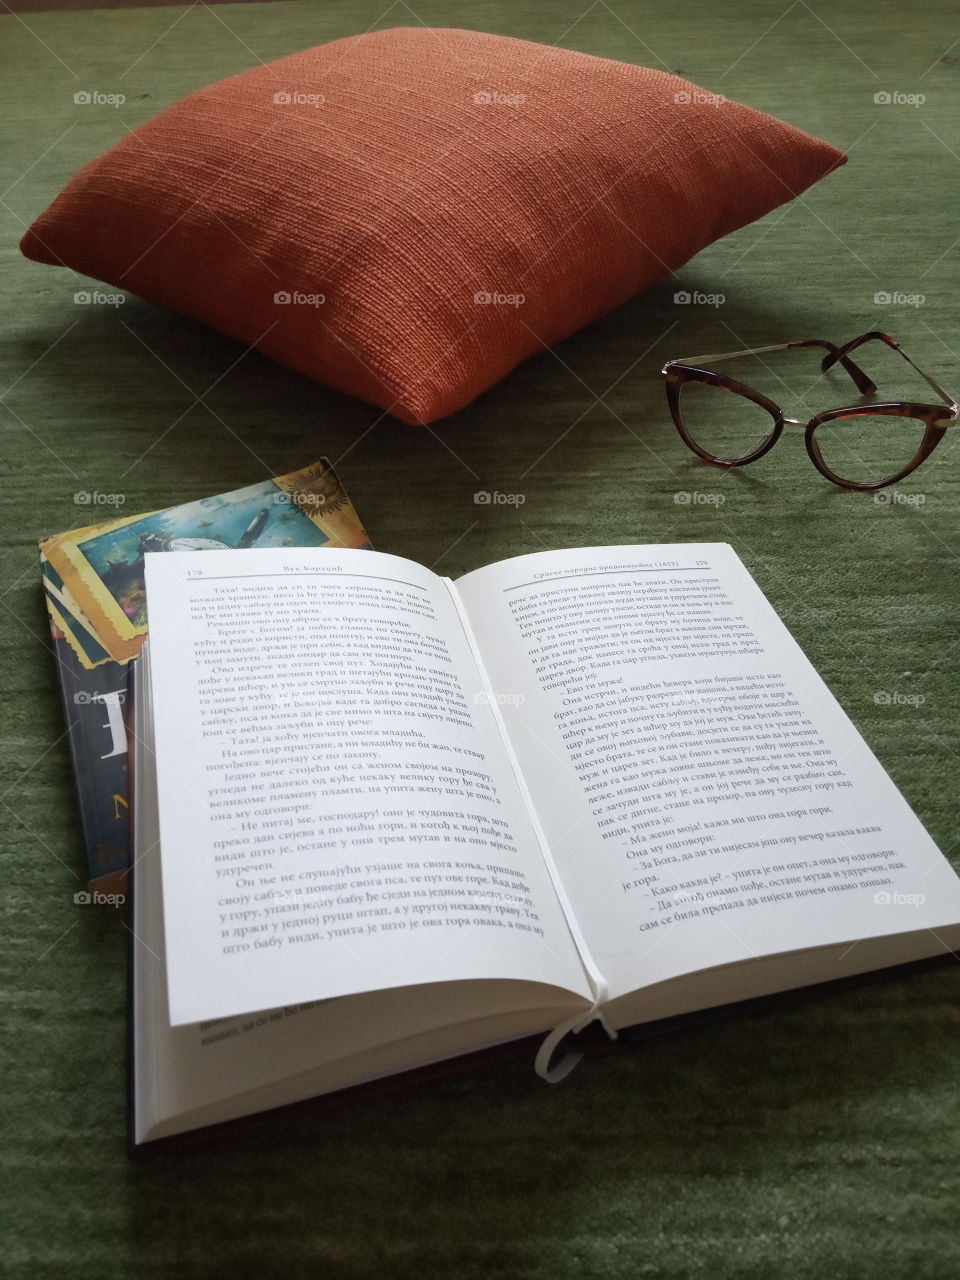 Promotion of book reading, arrangement of orange pillow, books and glasses.